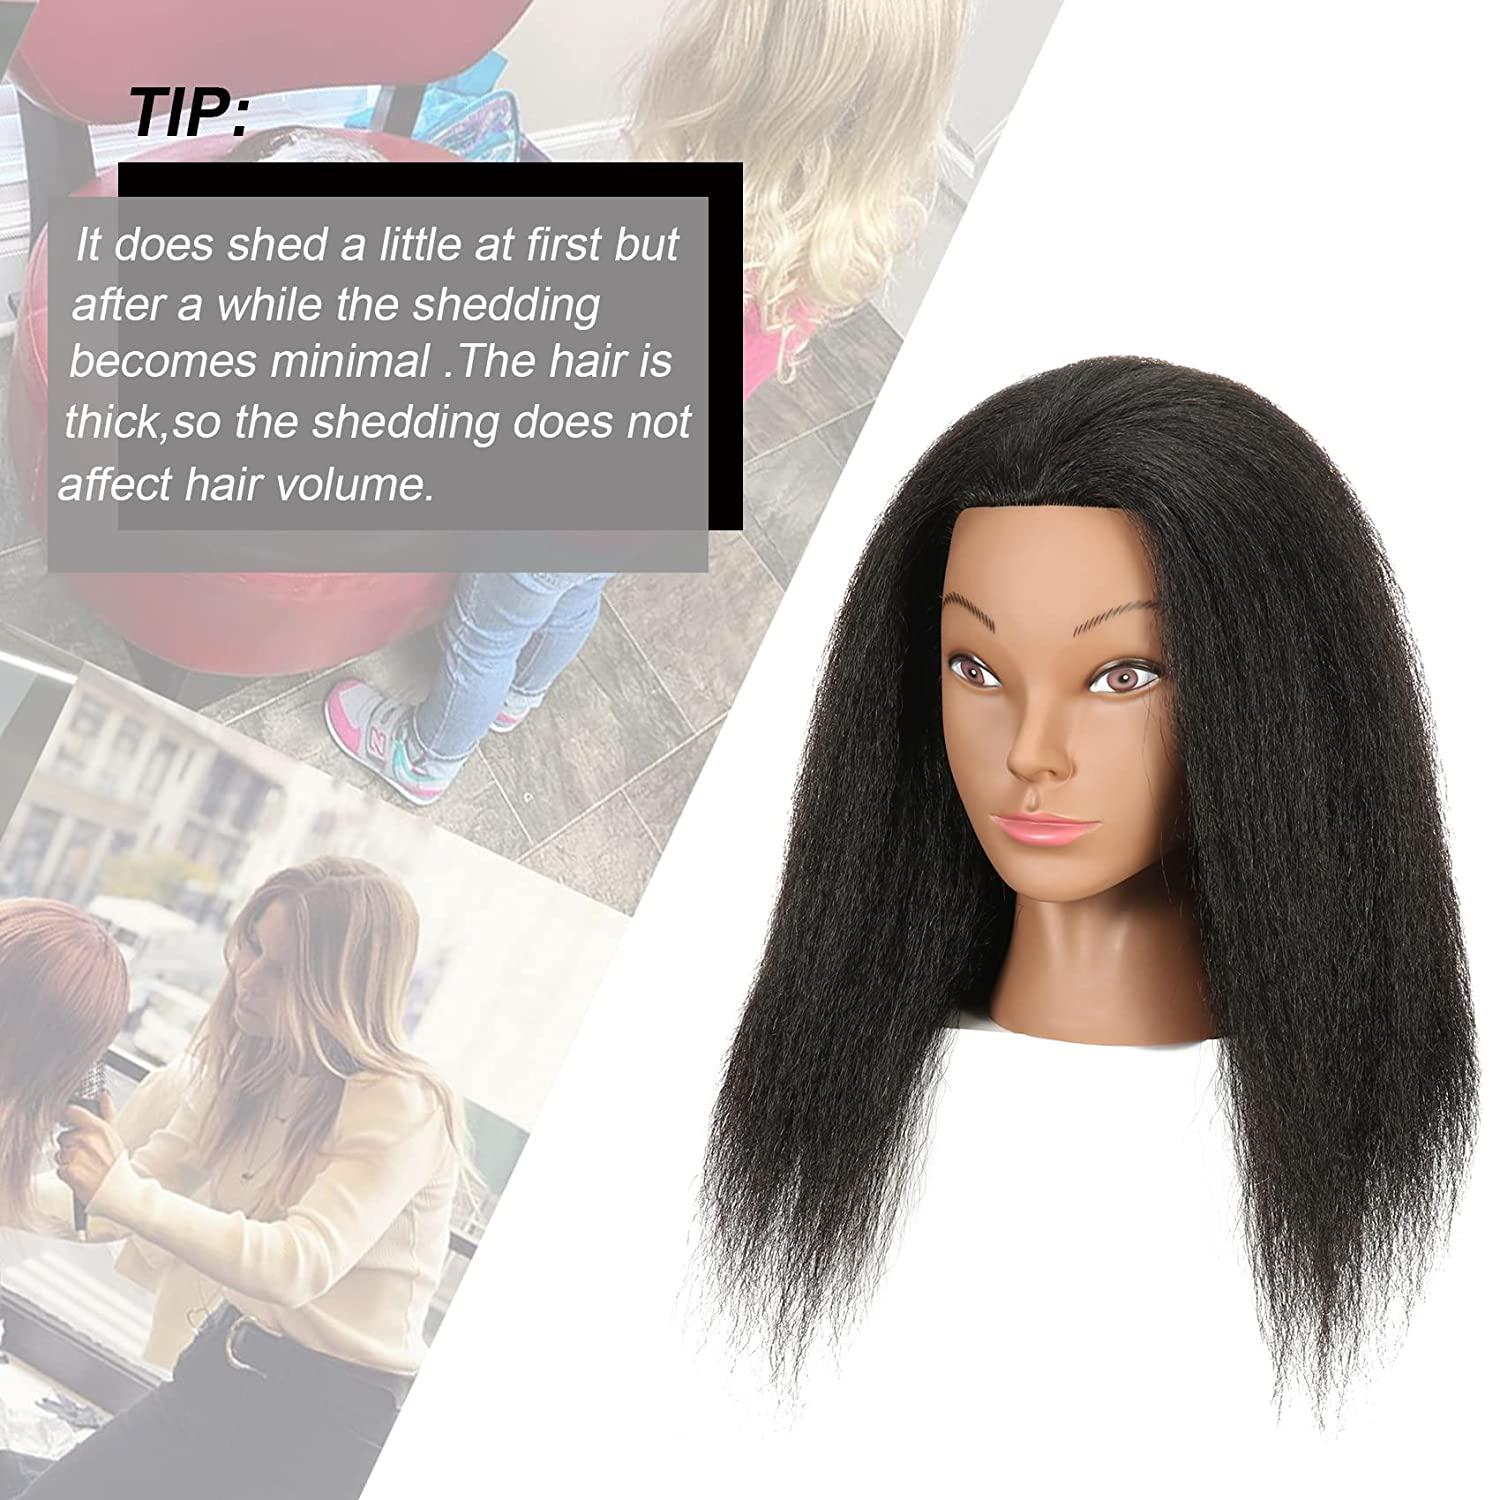 100% Human Hair Mannequin Head Kinky Curly Head Mannequin Real Hair  Cosmetology Doll Head for Hair-styling Practice Manikin Training Head With  Clamp